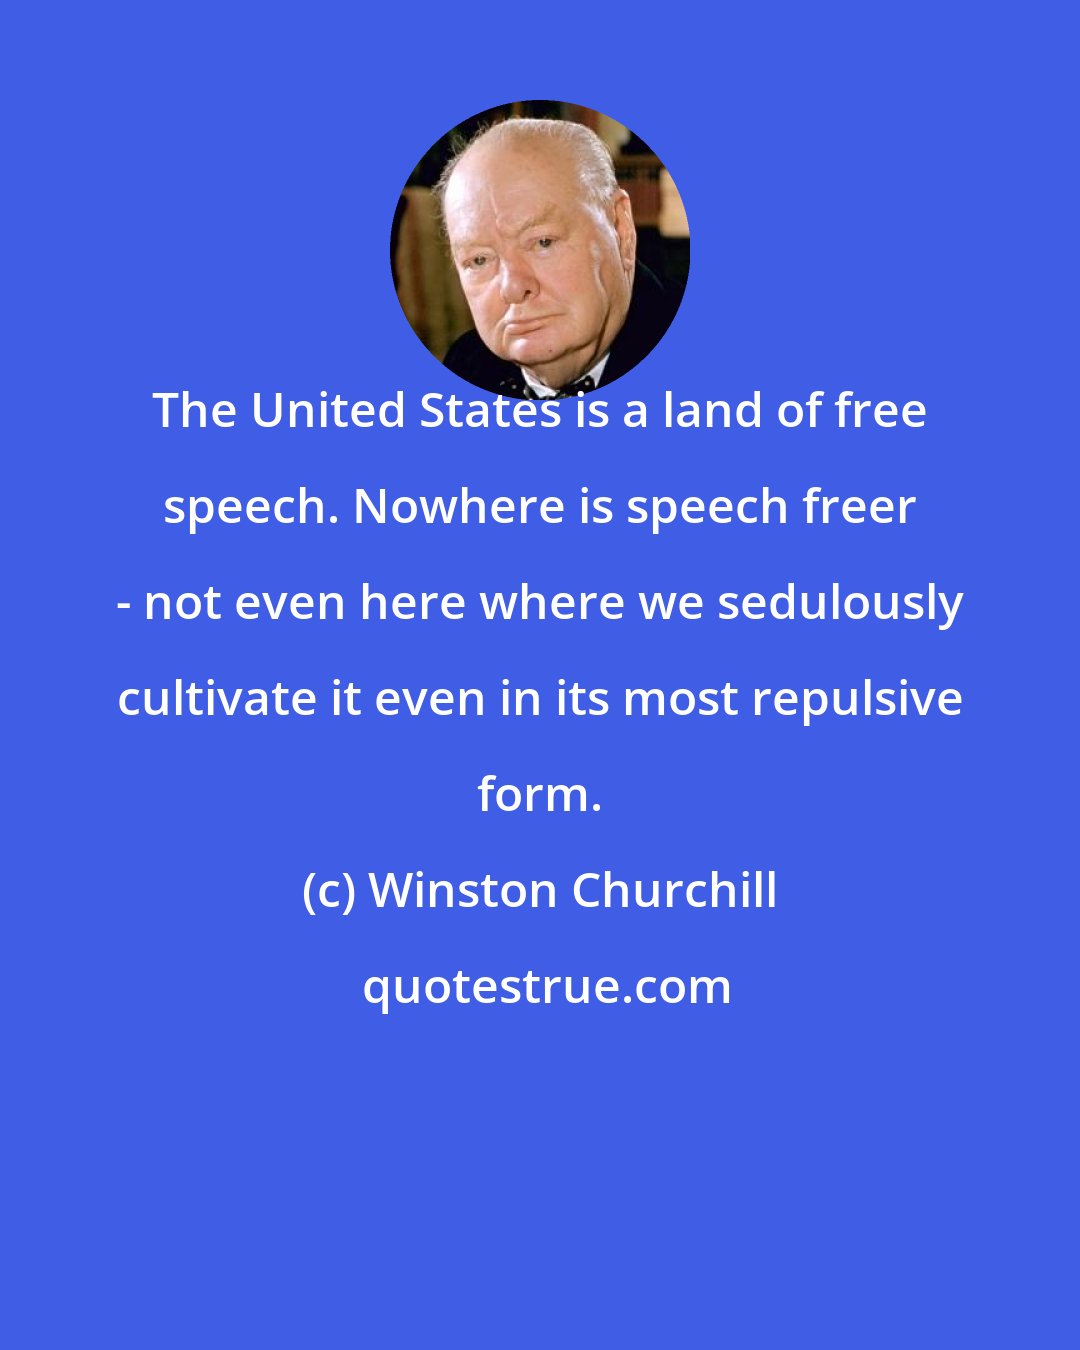 Winston Churchill: The United States is a land of free speech. Nowhere is speech freer - not even here where we sedulously cultivate it even in its most repulsive form.